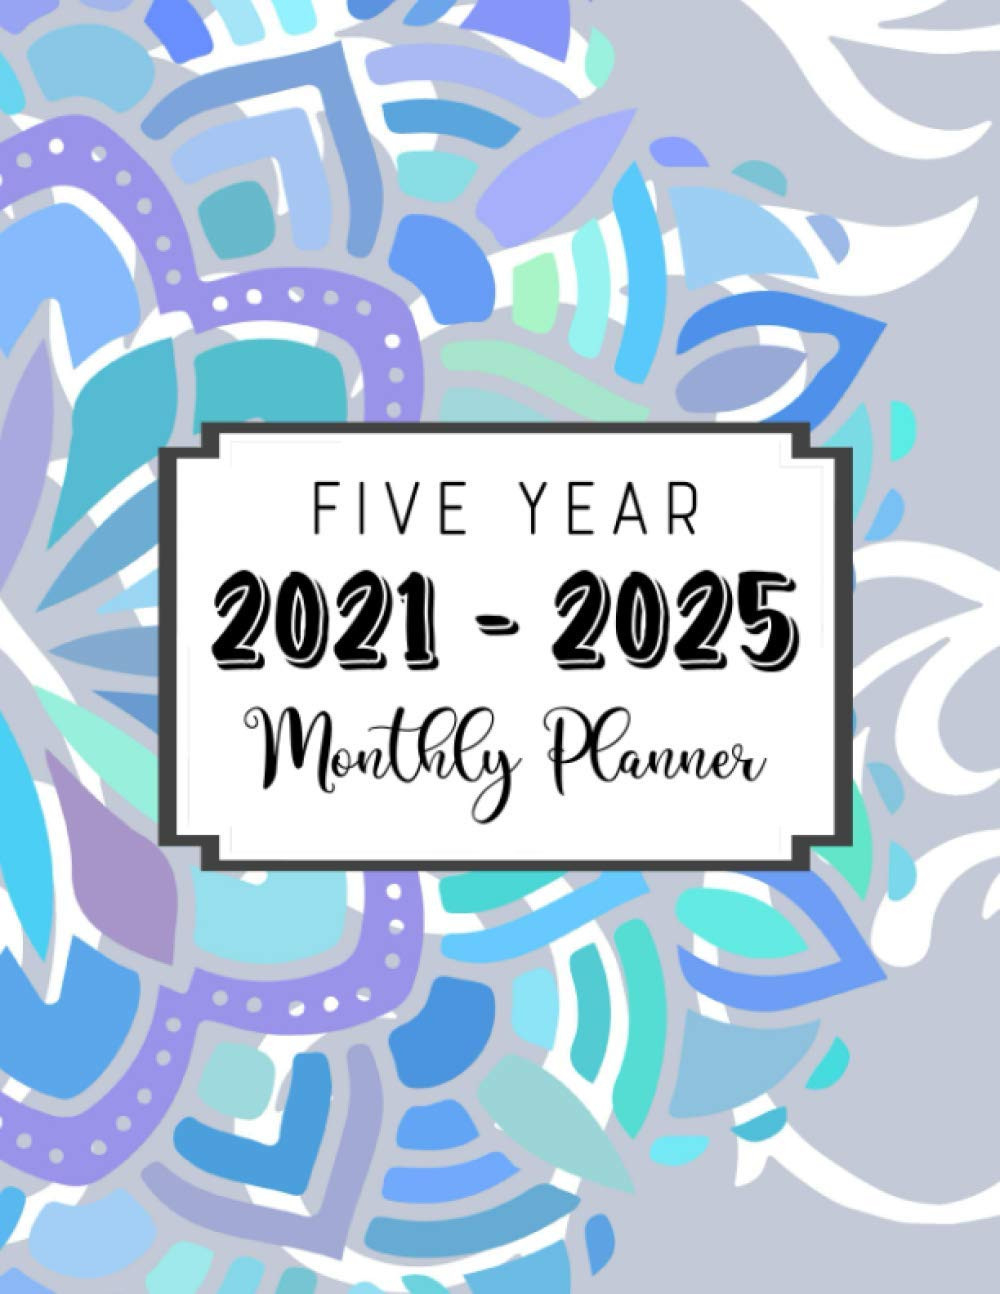 Five Year 2021 - 2025 Monthly Planner: Academic Writing-2021 Vacation Planner